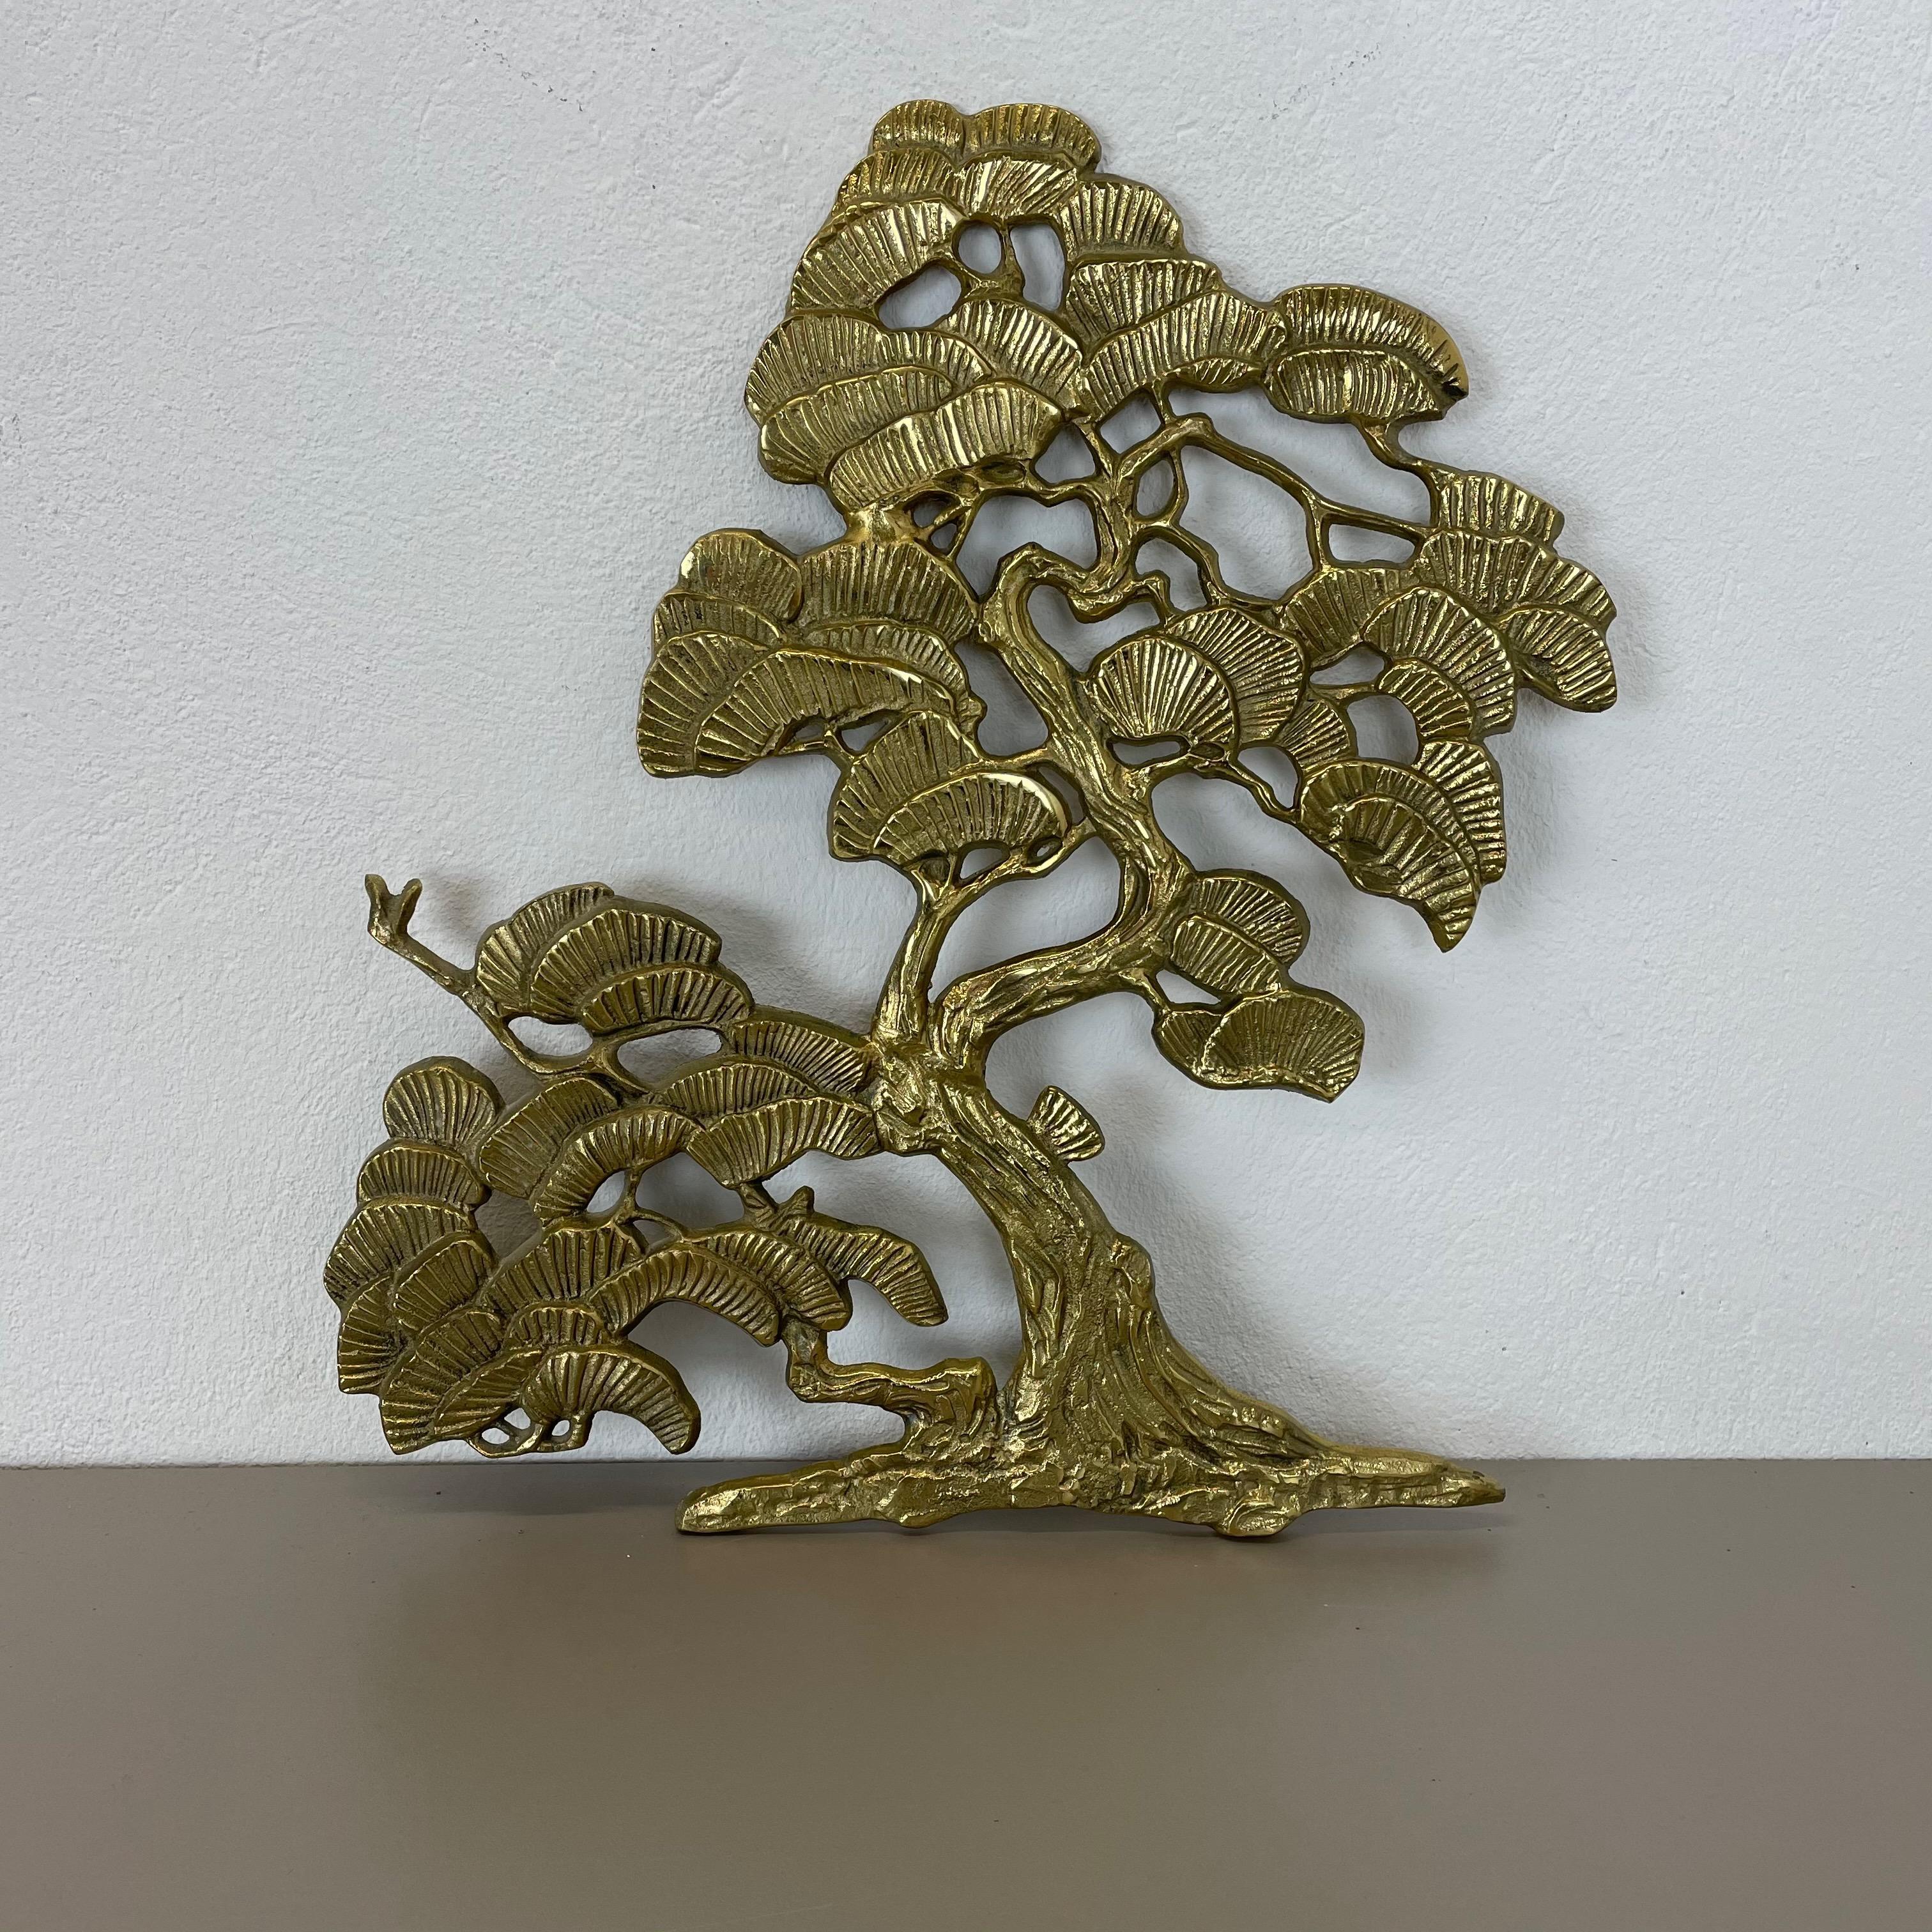 Modernist 60s BONSAI wall sculpture made in Germany.

Vintage 60s brass metal wall sculpture. A divergence from the typical subject of birds. This wall hanging is very elegant and filigran with its bonsai theme. High quality German craftsmanship